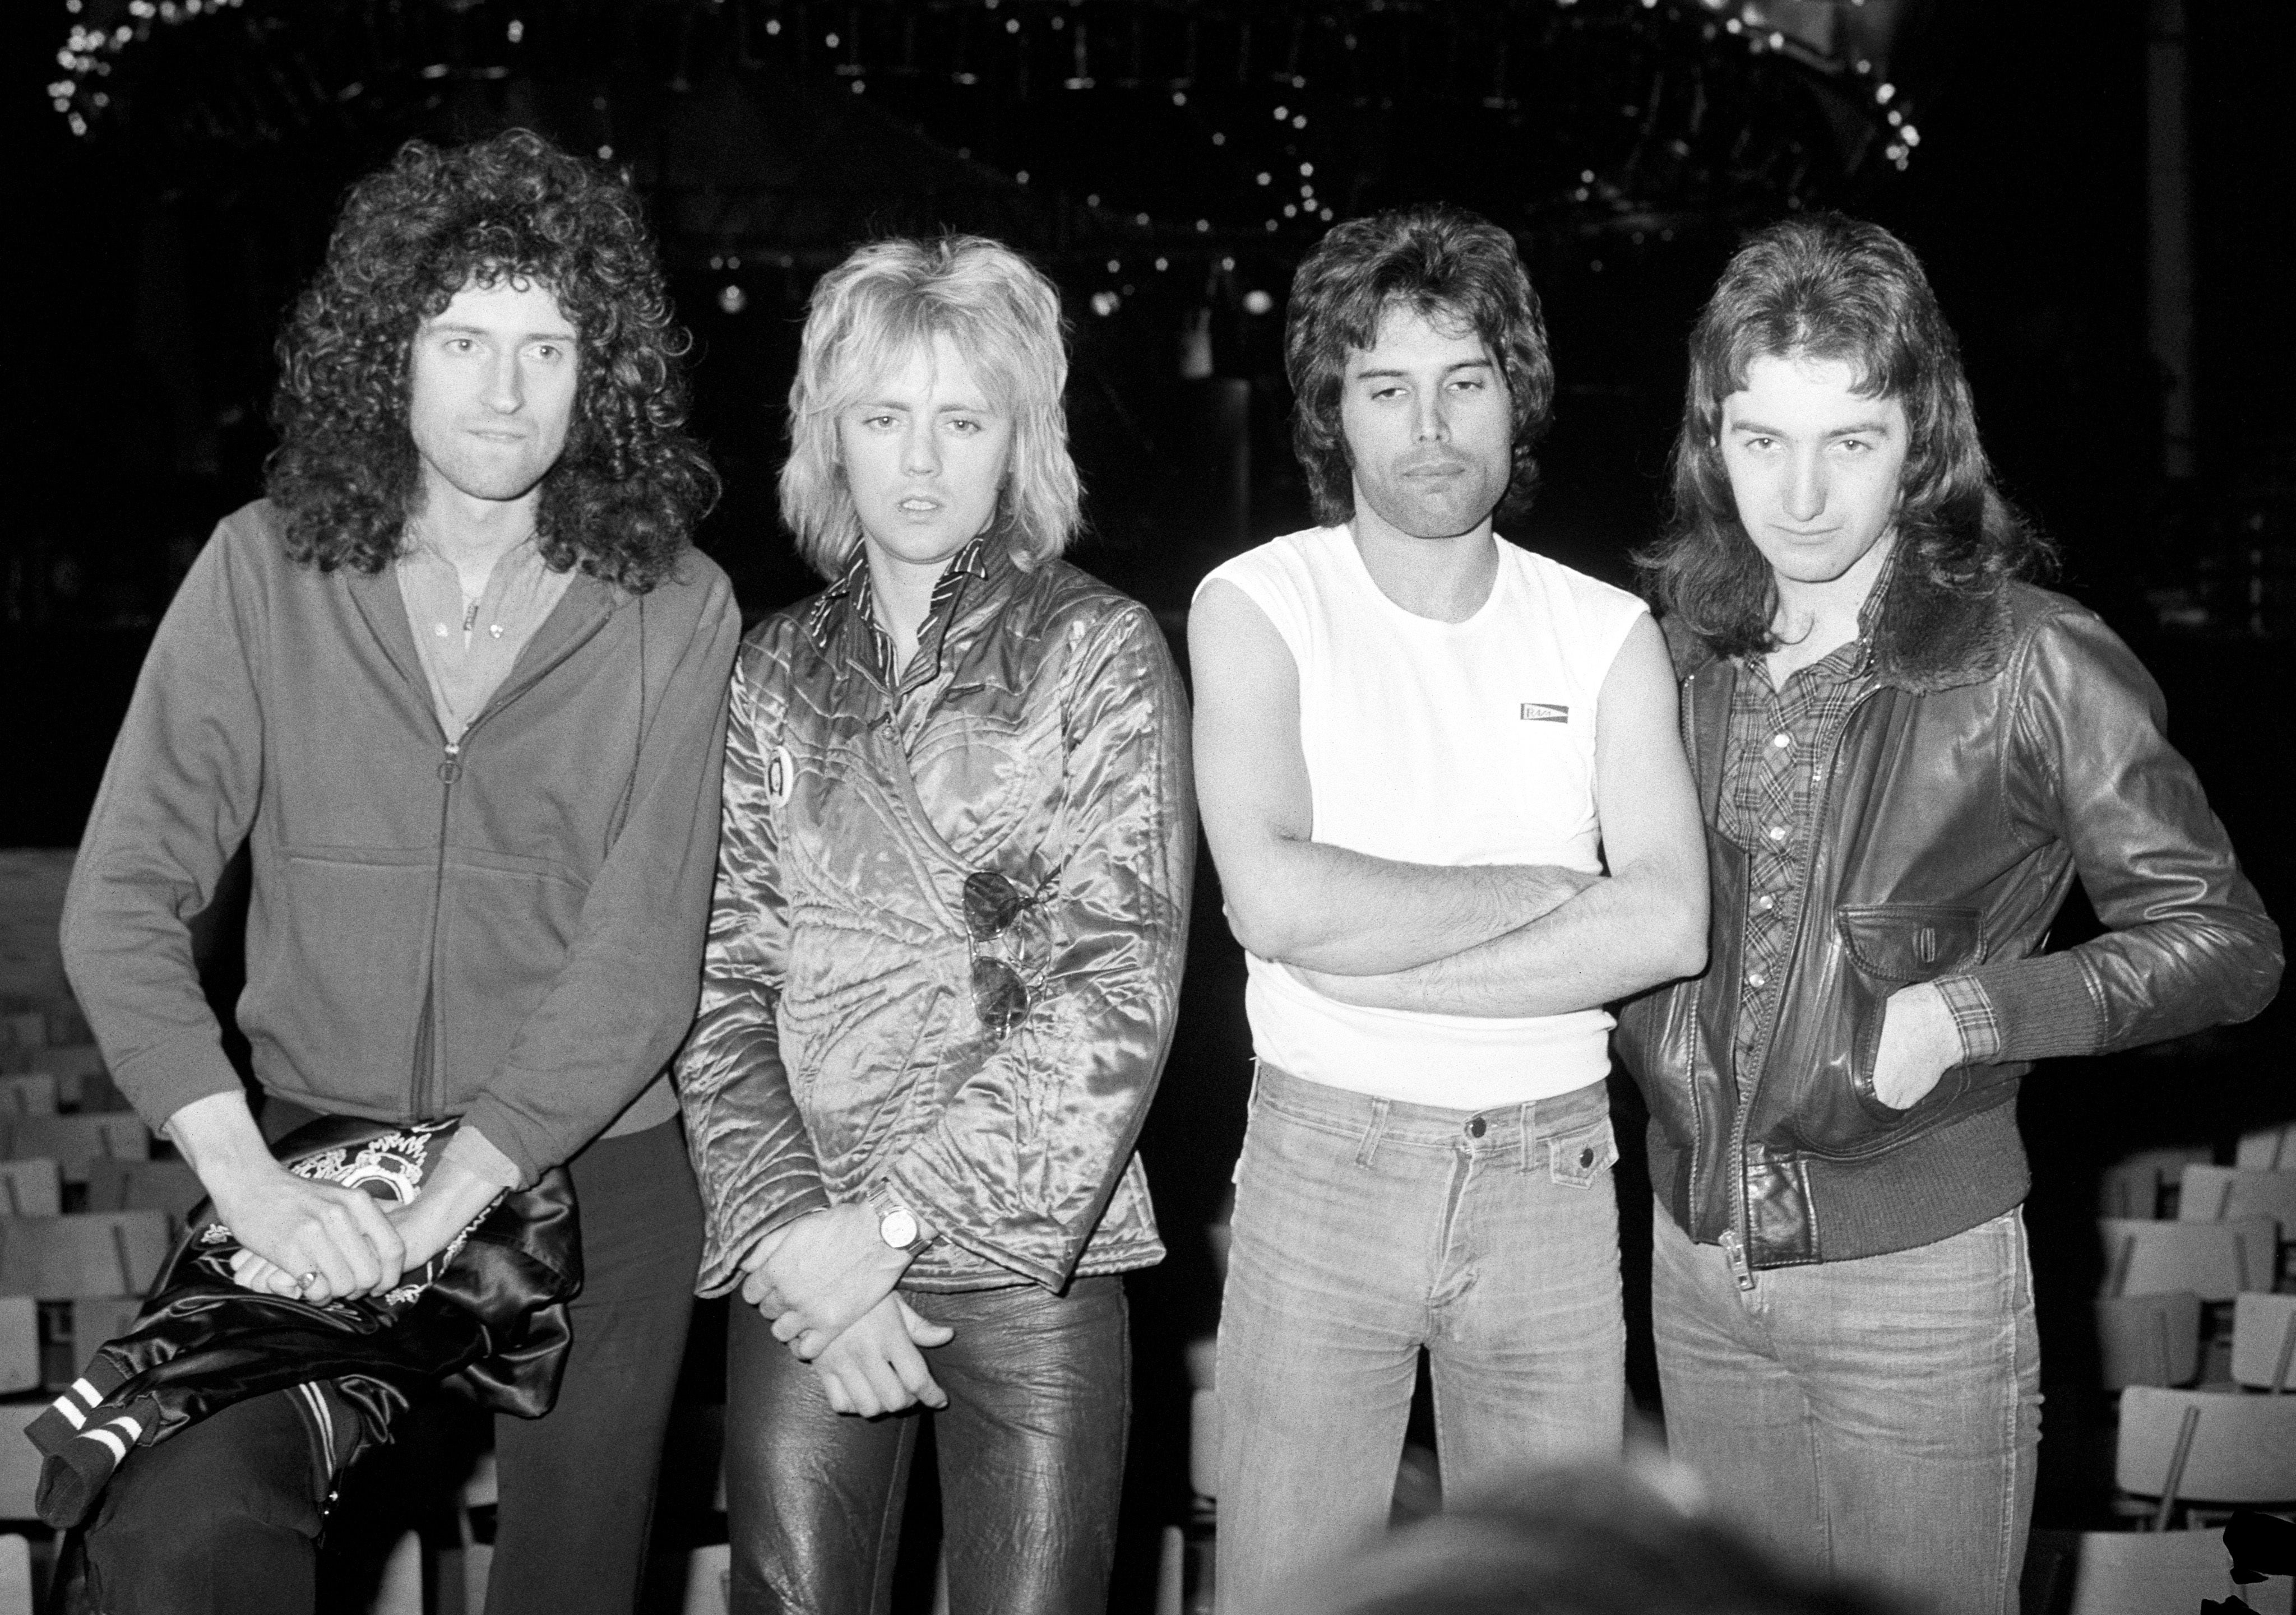 Brian May, Roger Taylor, Freddie Mercury and John Deacon of Queen in 1977